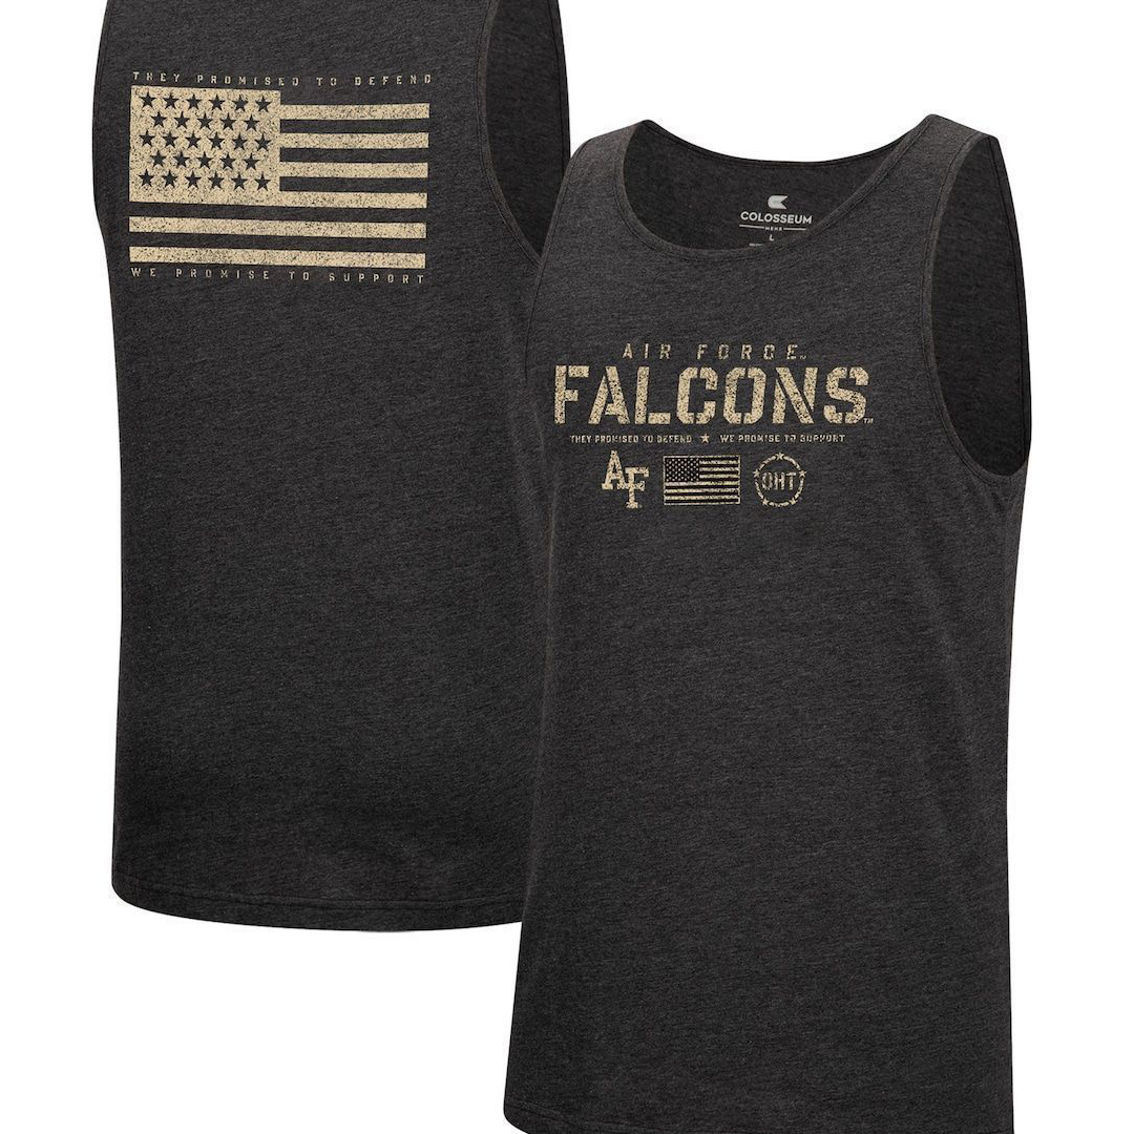 Colosseum Men's Heathered Black Air Force Falcons Military Appreciation OHT Transport Tank Top - Image 2 of 4